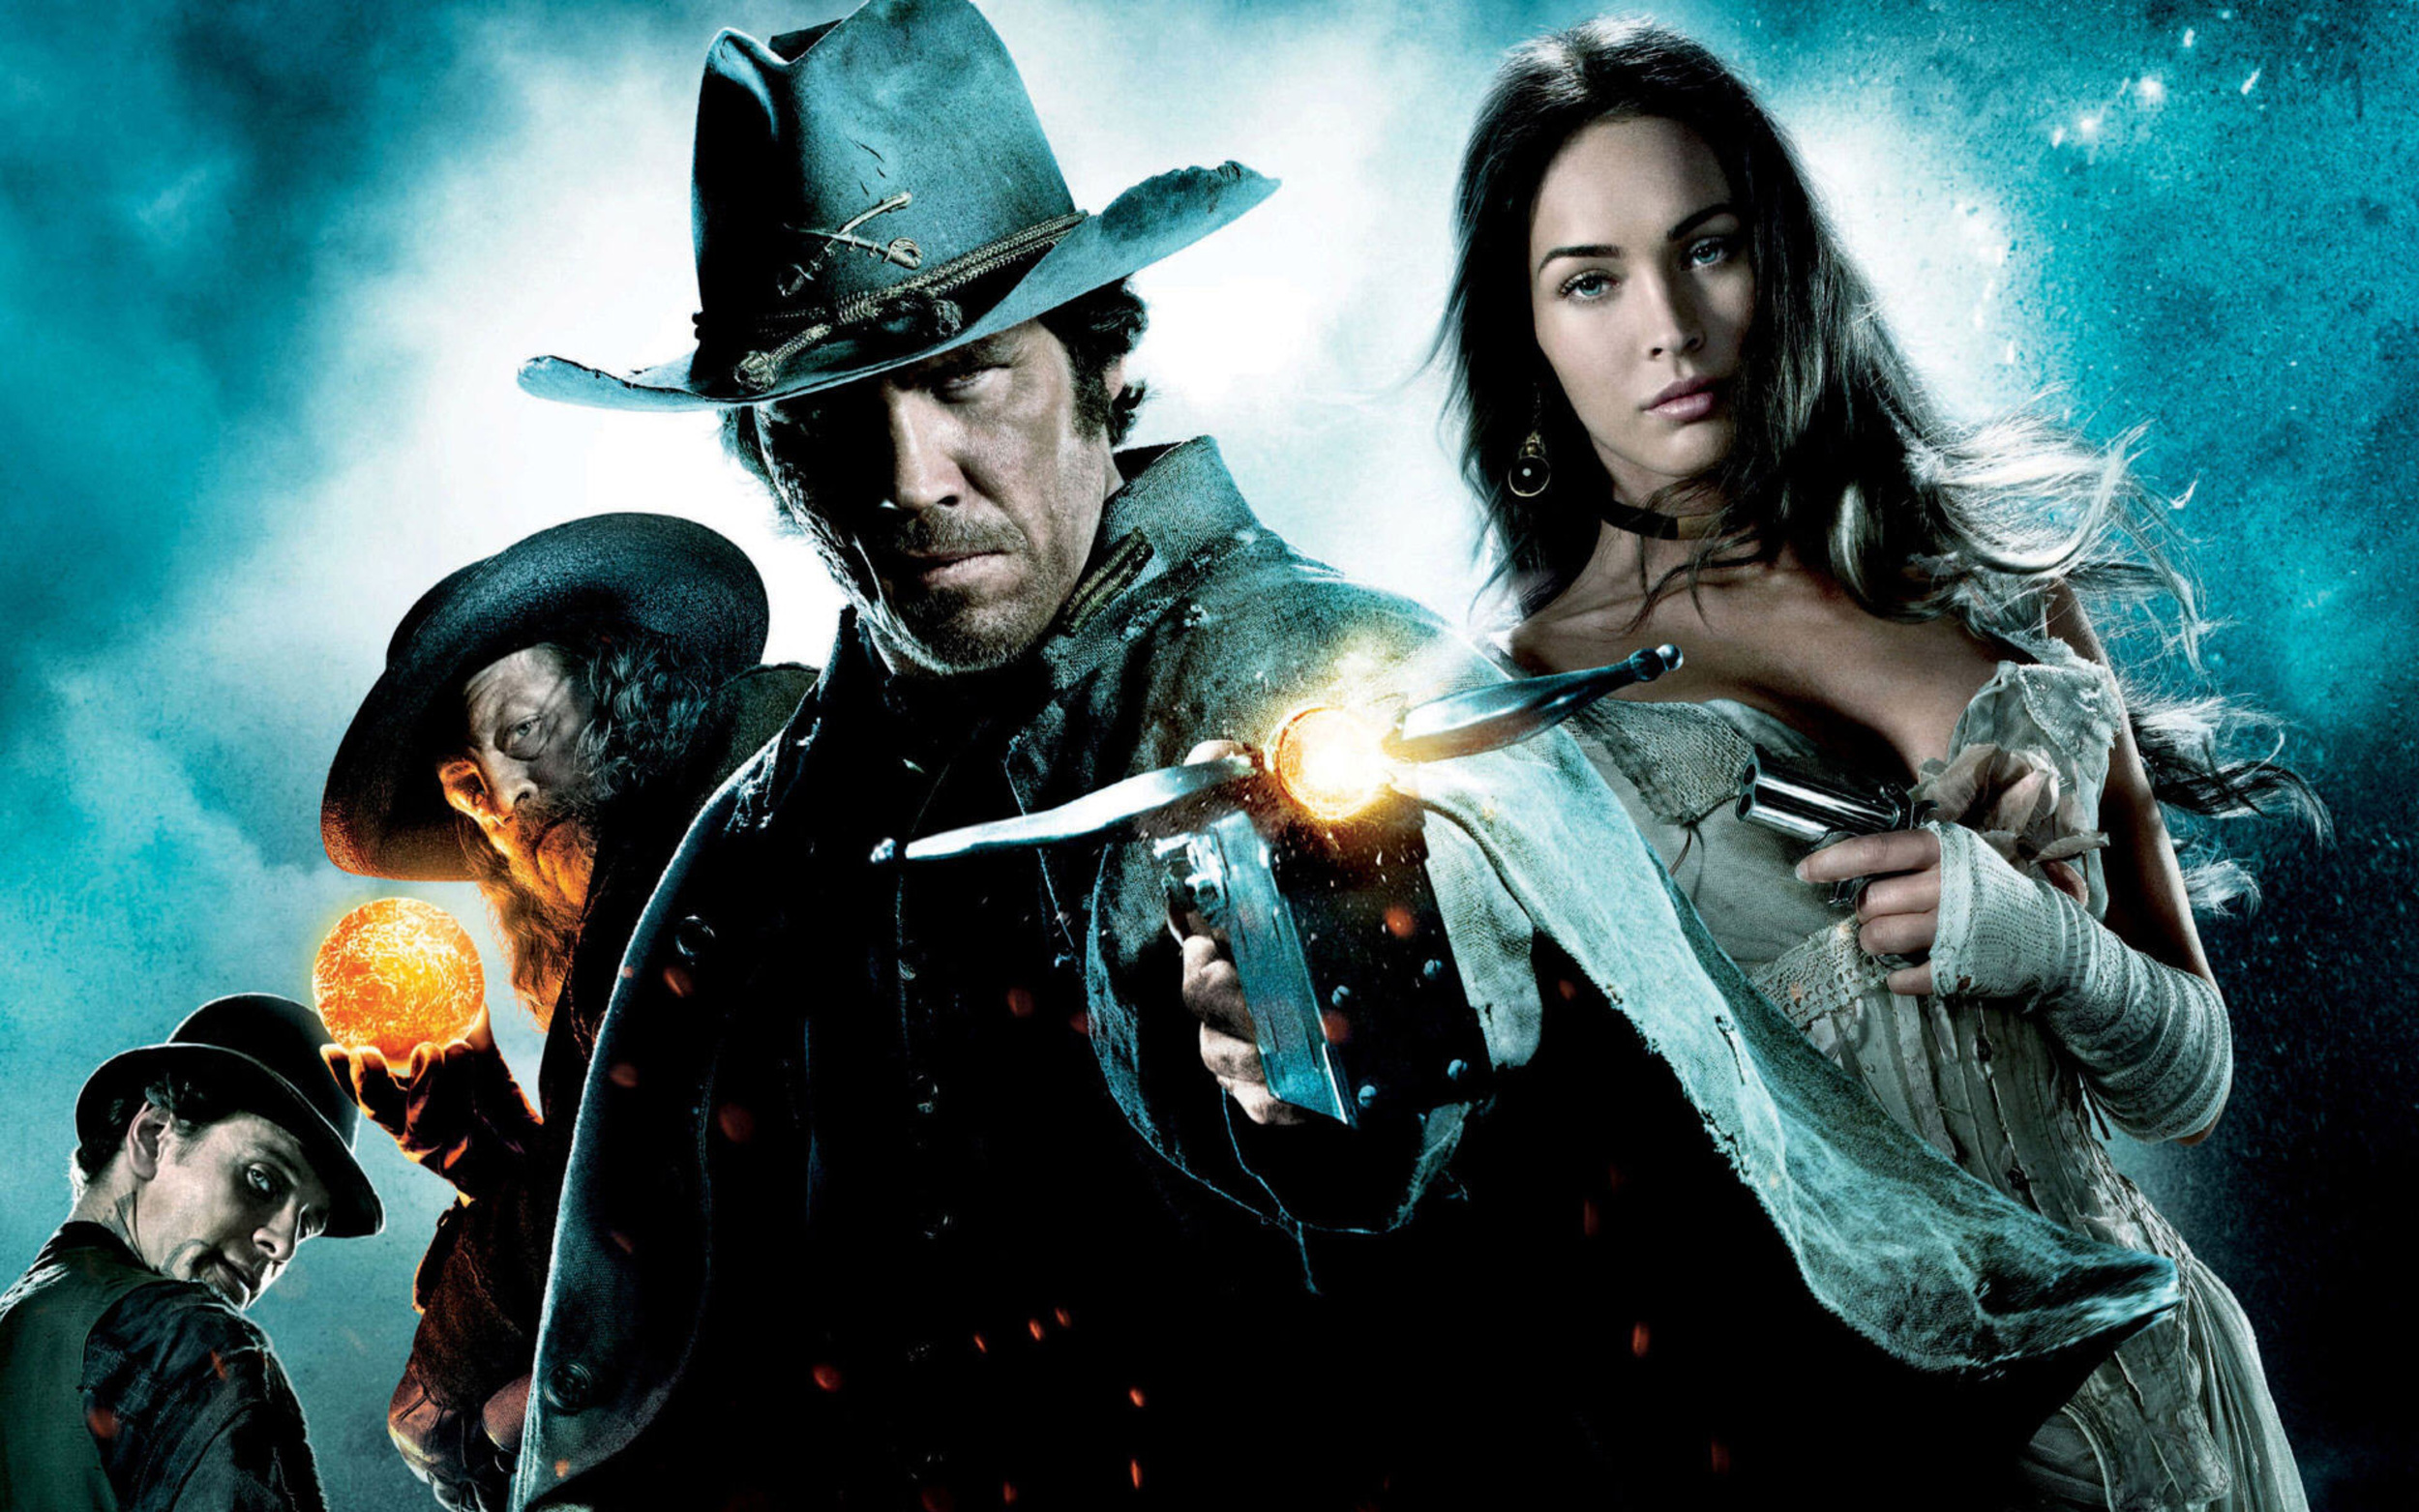 <p>Josh Brolin’s take on the scarred bounty hunter "Jonah Hex" was an unmitigated disaster in every way. The film was plagued by production troubles and the fairly significant issue that no one outside of DC Comic fandom had ever heard of the character. Westerns are a tough enough sell nowadays. Why WB and DC decided to waste time on an unpopular character is utterly baffling.</p><p>You may also like: <a href='https://www.yardbarker.com/entertainment/articles/25_best_movies_about_american_history/s1__39035981'>25 best movies about American history</a></p>